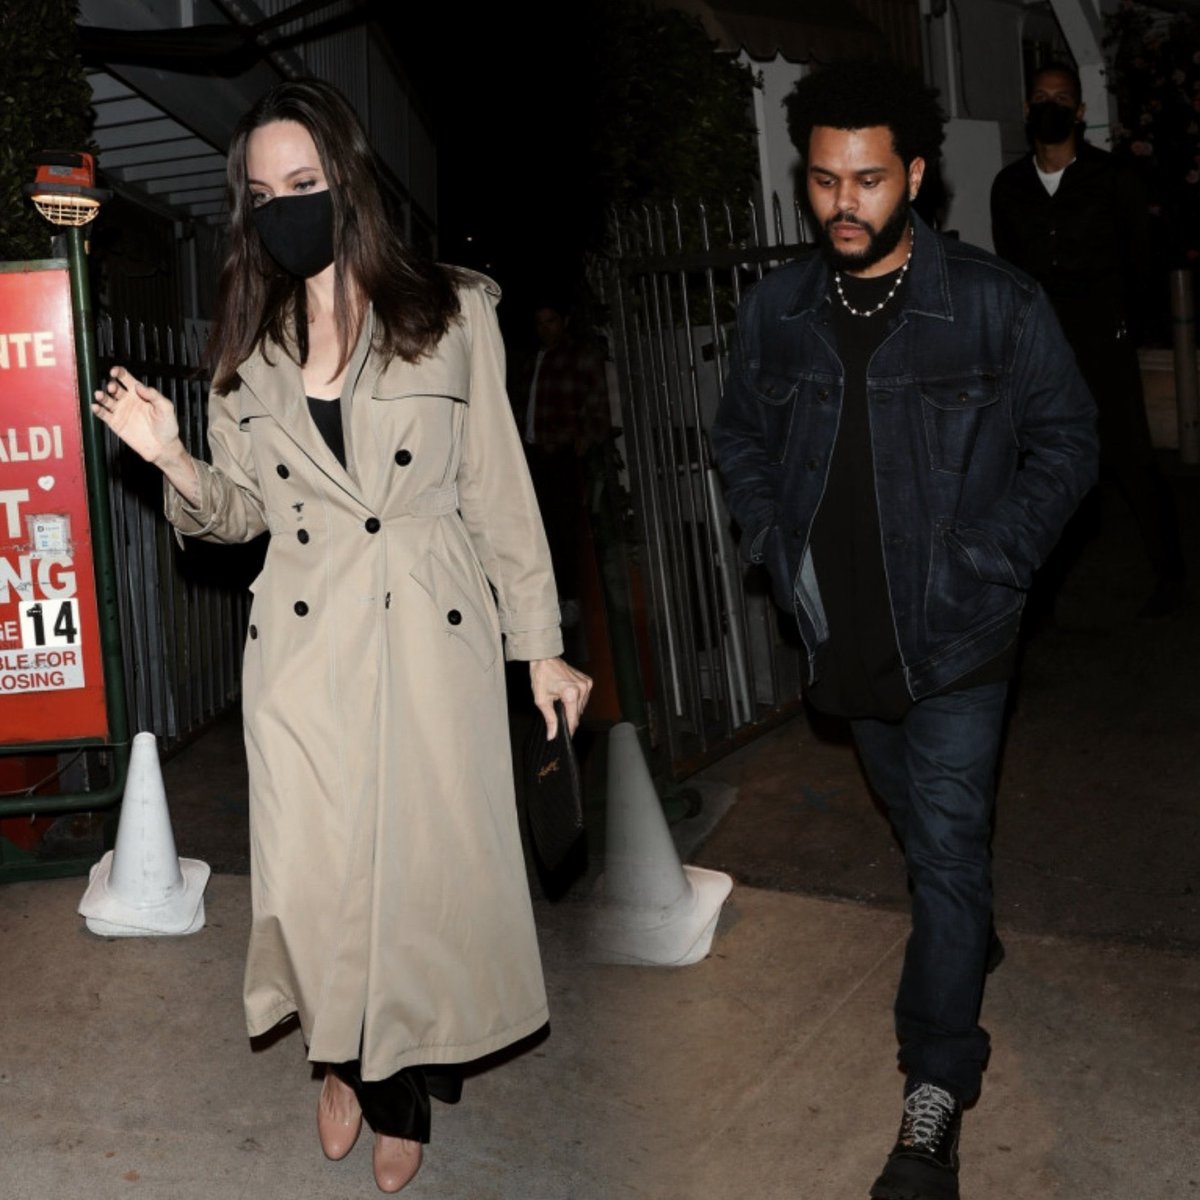 angelina-jolie-and-the-weeknd-fuel-dating-rumors-again-as-they-step-out-for-dinner-in-la